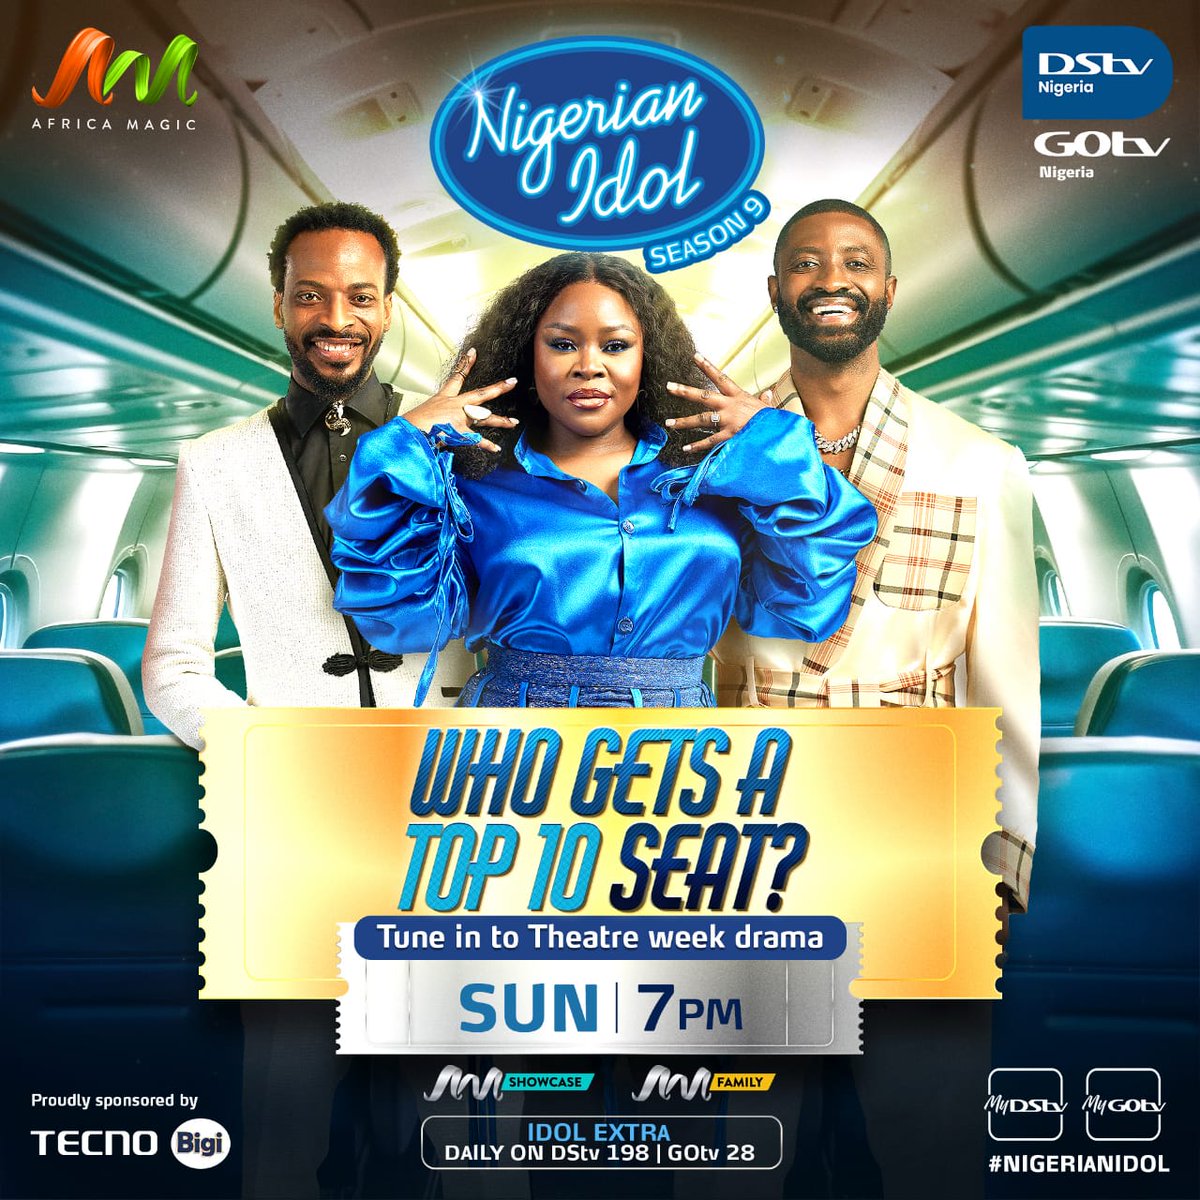 This coming Sunday by 7pm, watch out for who gets a top 10 seat at the Nigerian Idol, do not missed this for anything. #NigerianIdol